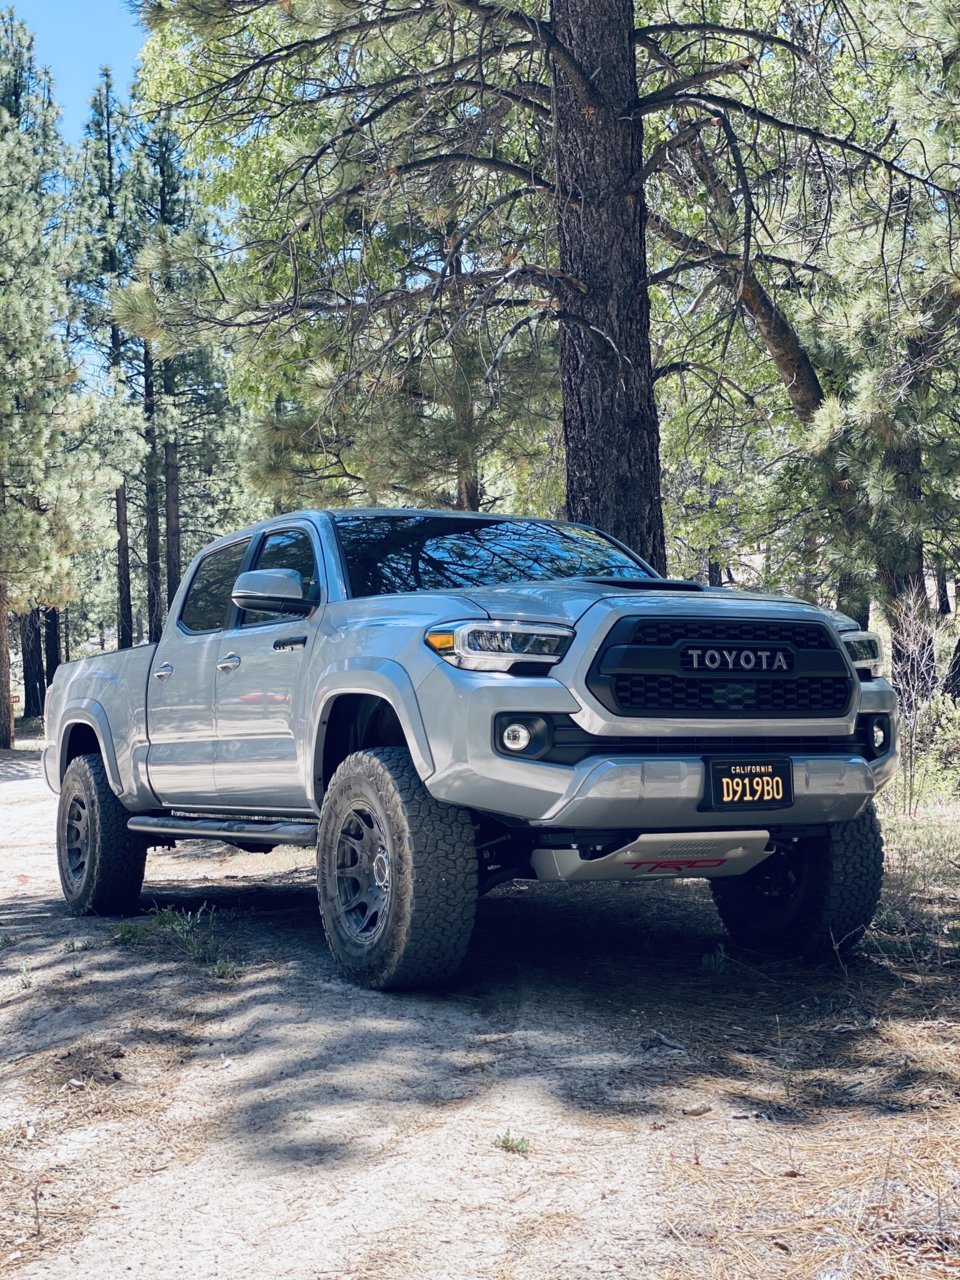 Let's See Those Double Cab Long Beds! 3rd Gen | Page 99 | Tacoma World